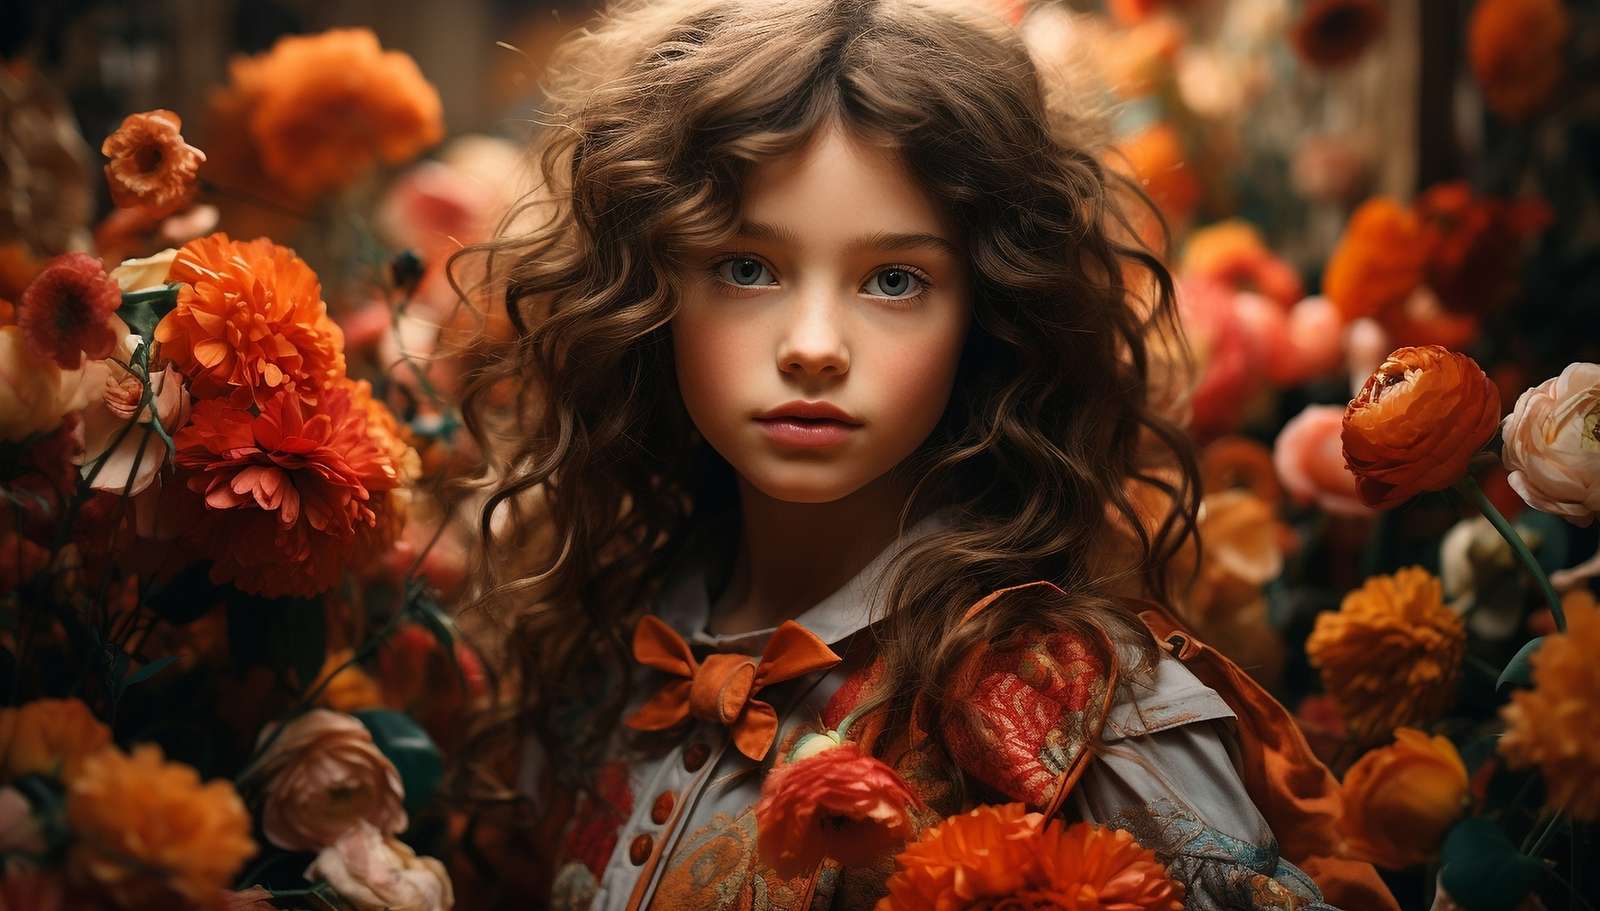 Long-haired girl in orange flowers jigsaw puzzle online